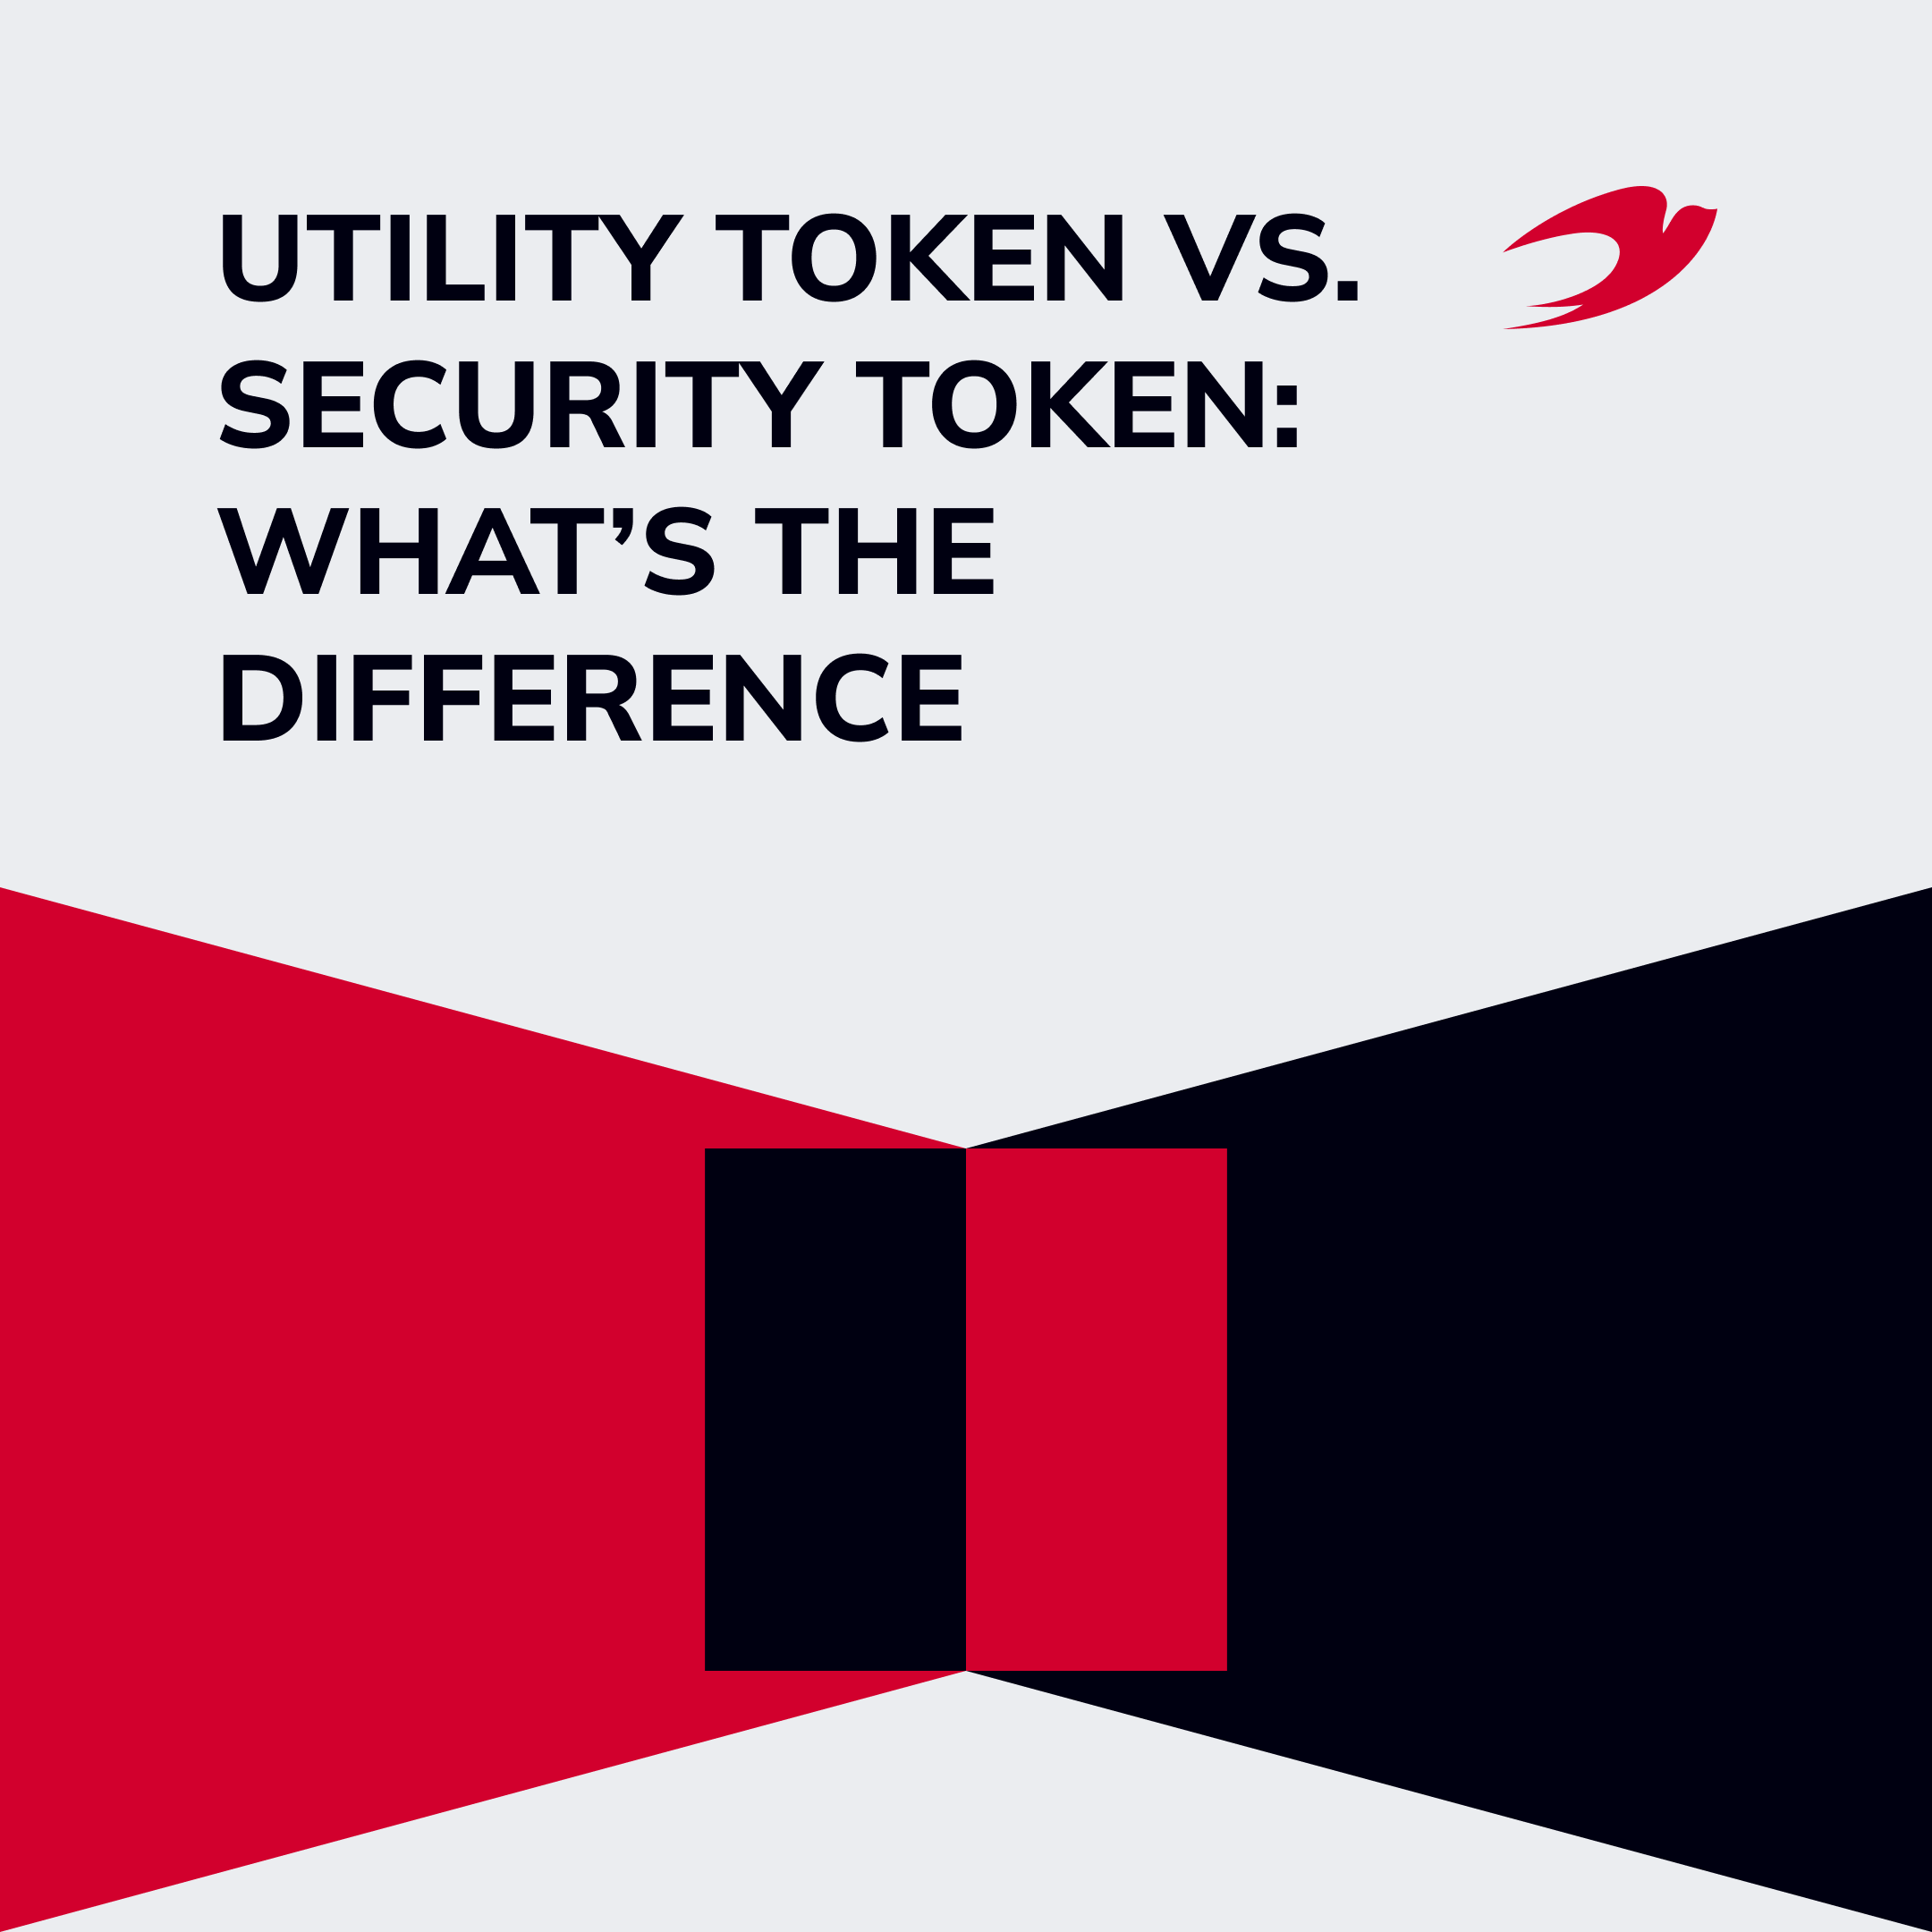 Utility Token vs. Security Token: What’s the Difference